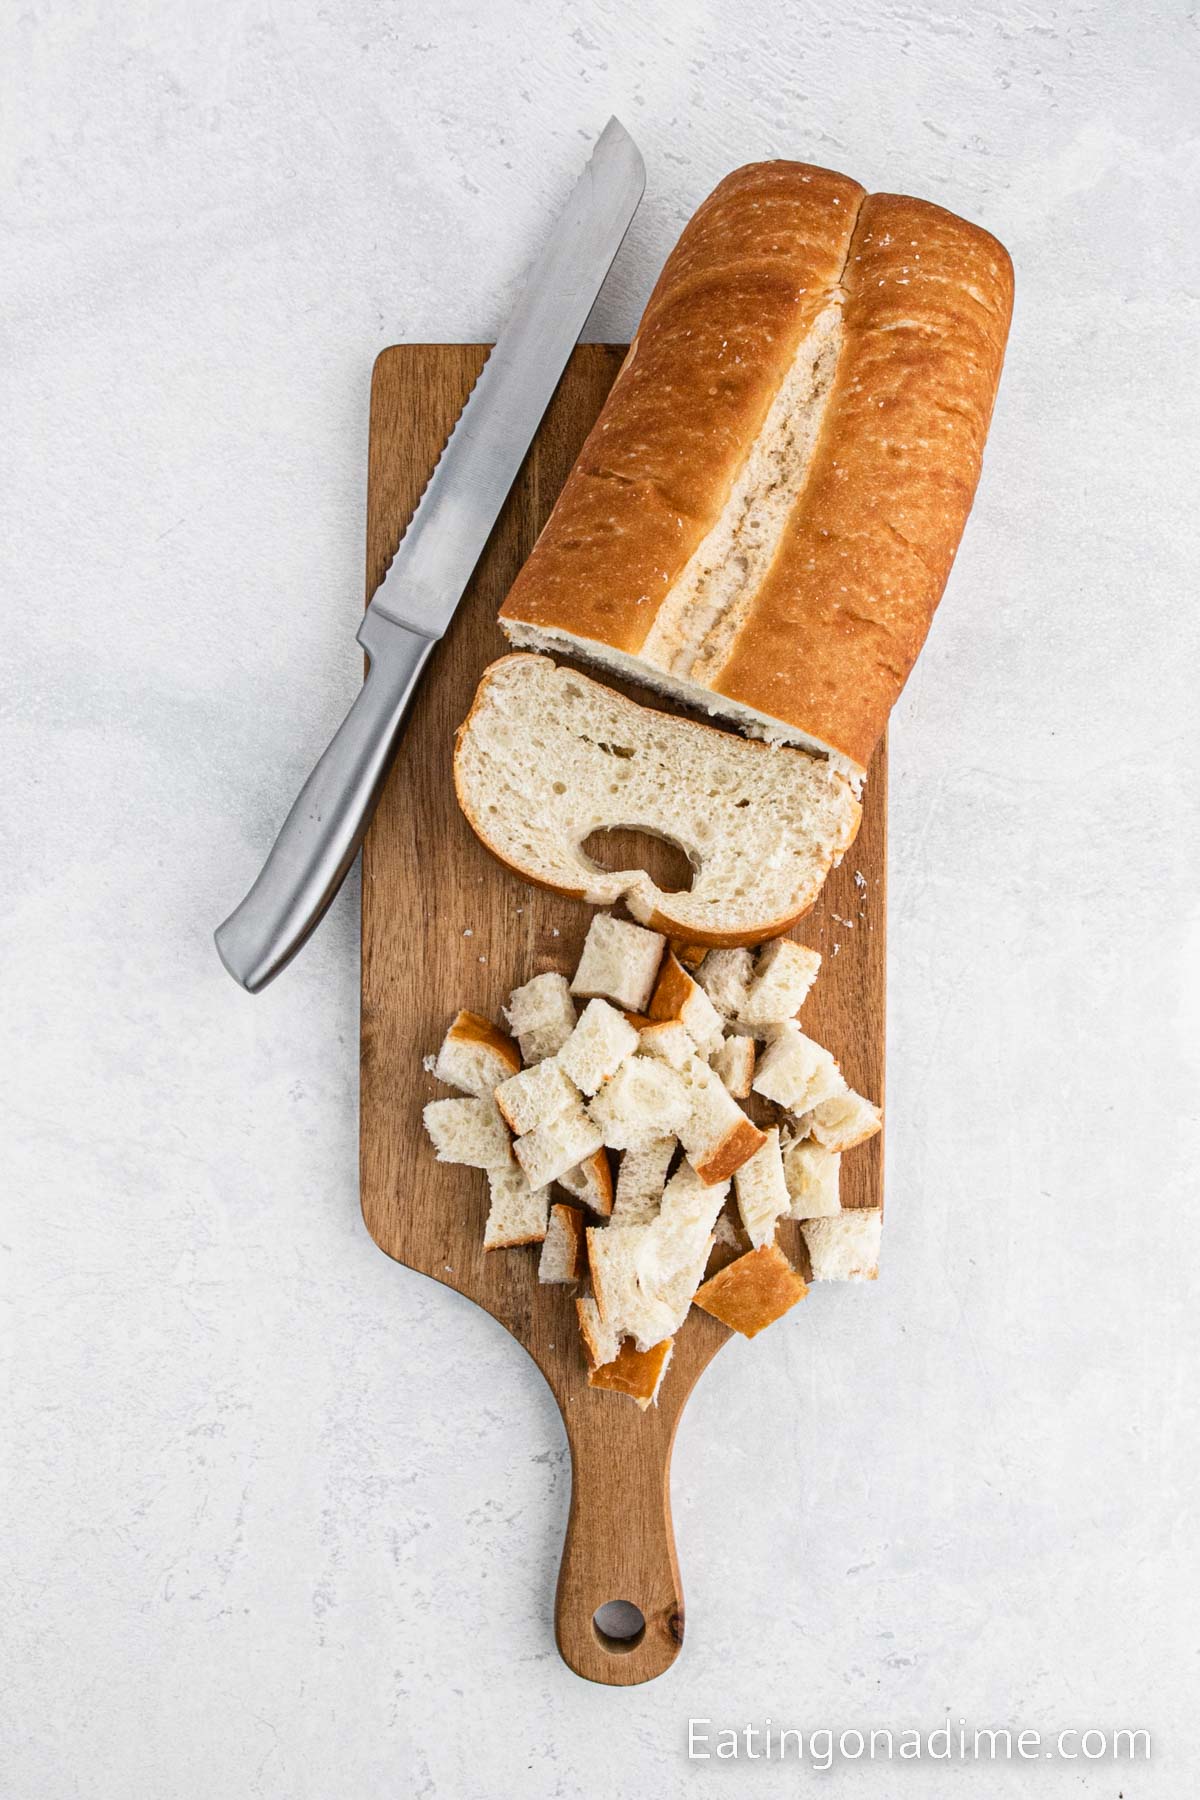 Dicing the bread up into cubes on a cutting board with a knife